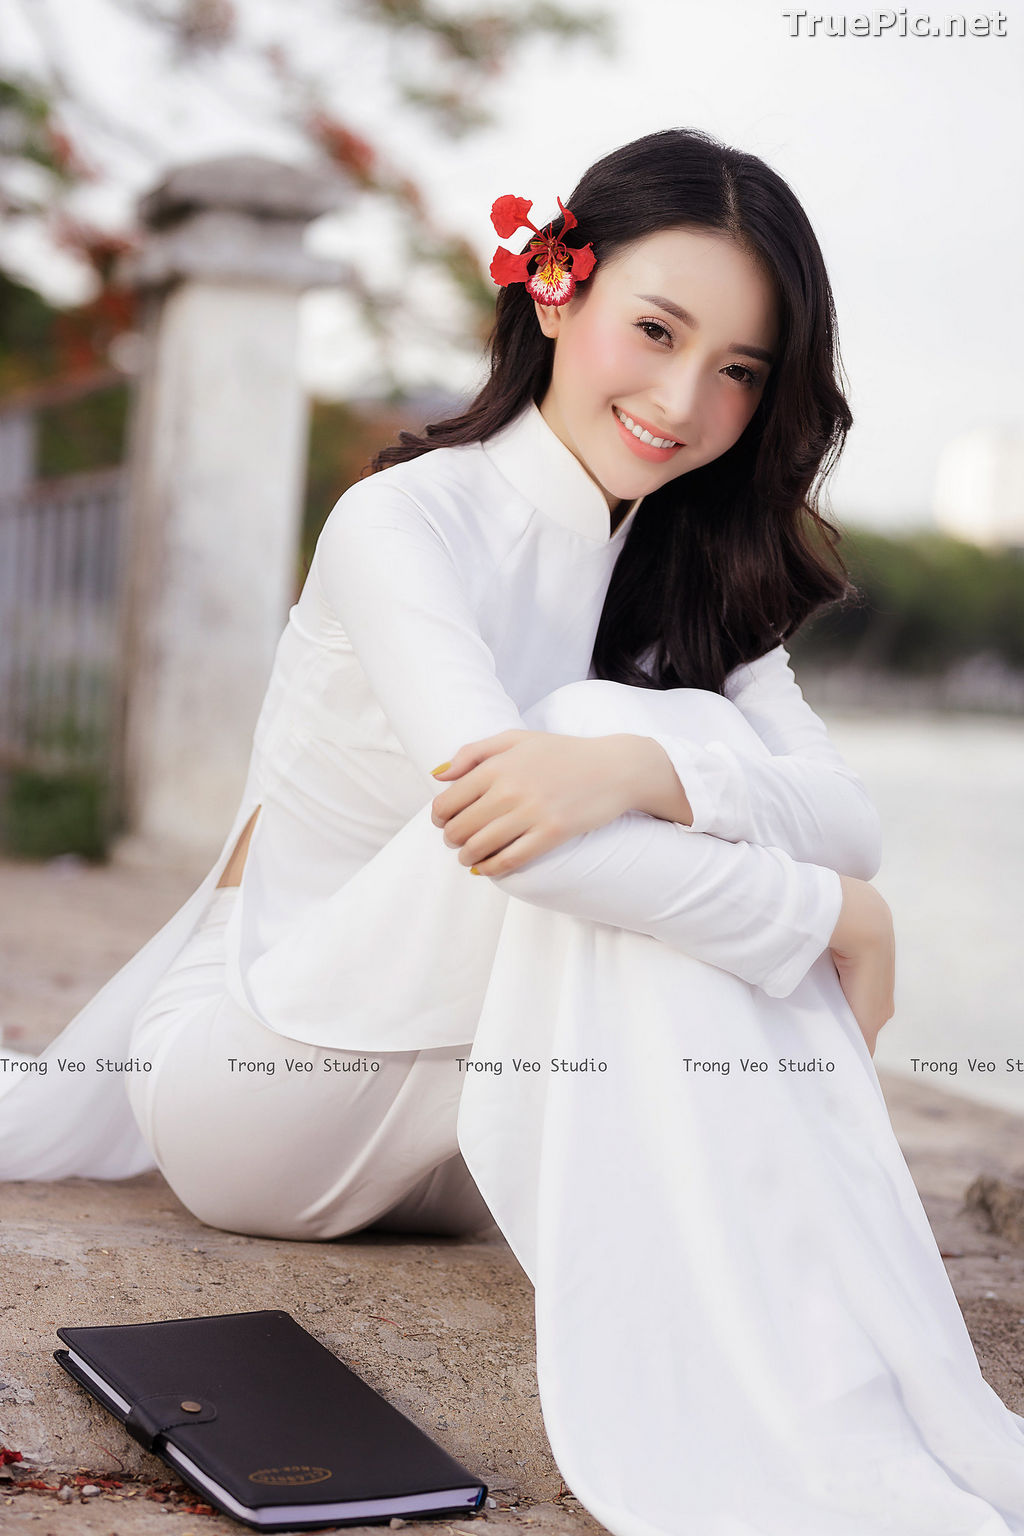 Image The Beauty of Vietnamese Girls with Traditional Dress (Ao Dai) #3 - TruePic.net - Picture-41